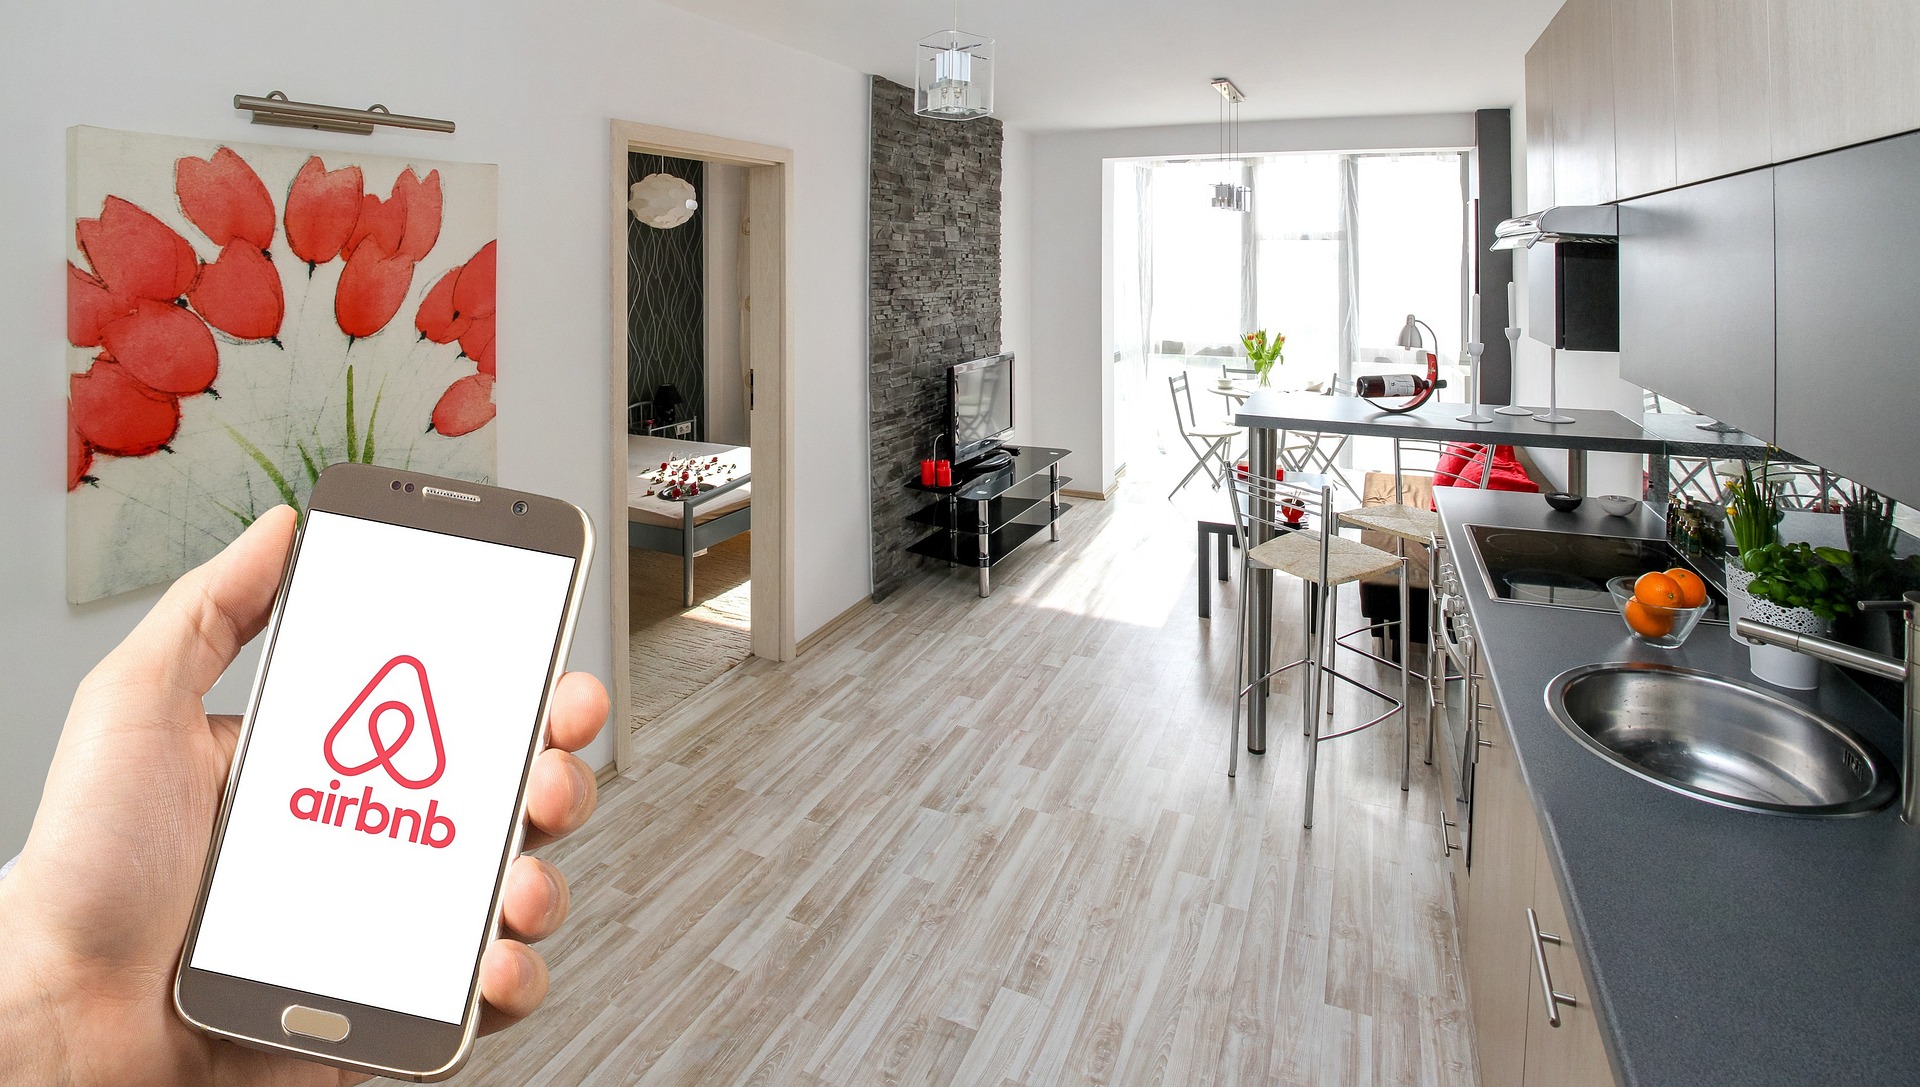 An airbnb unit with a person holding a phone showing the airbnb logo